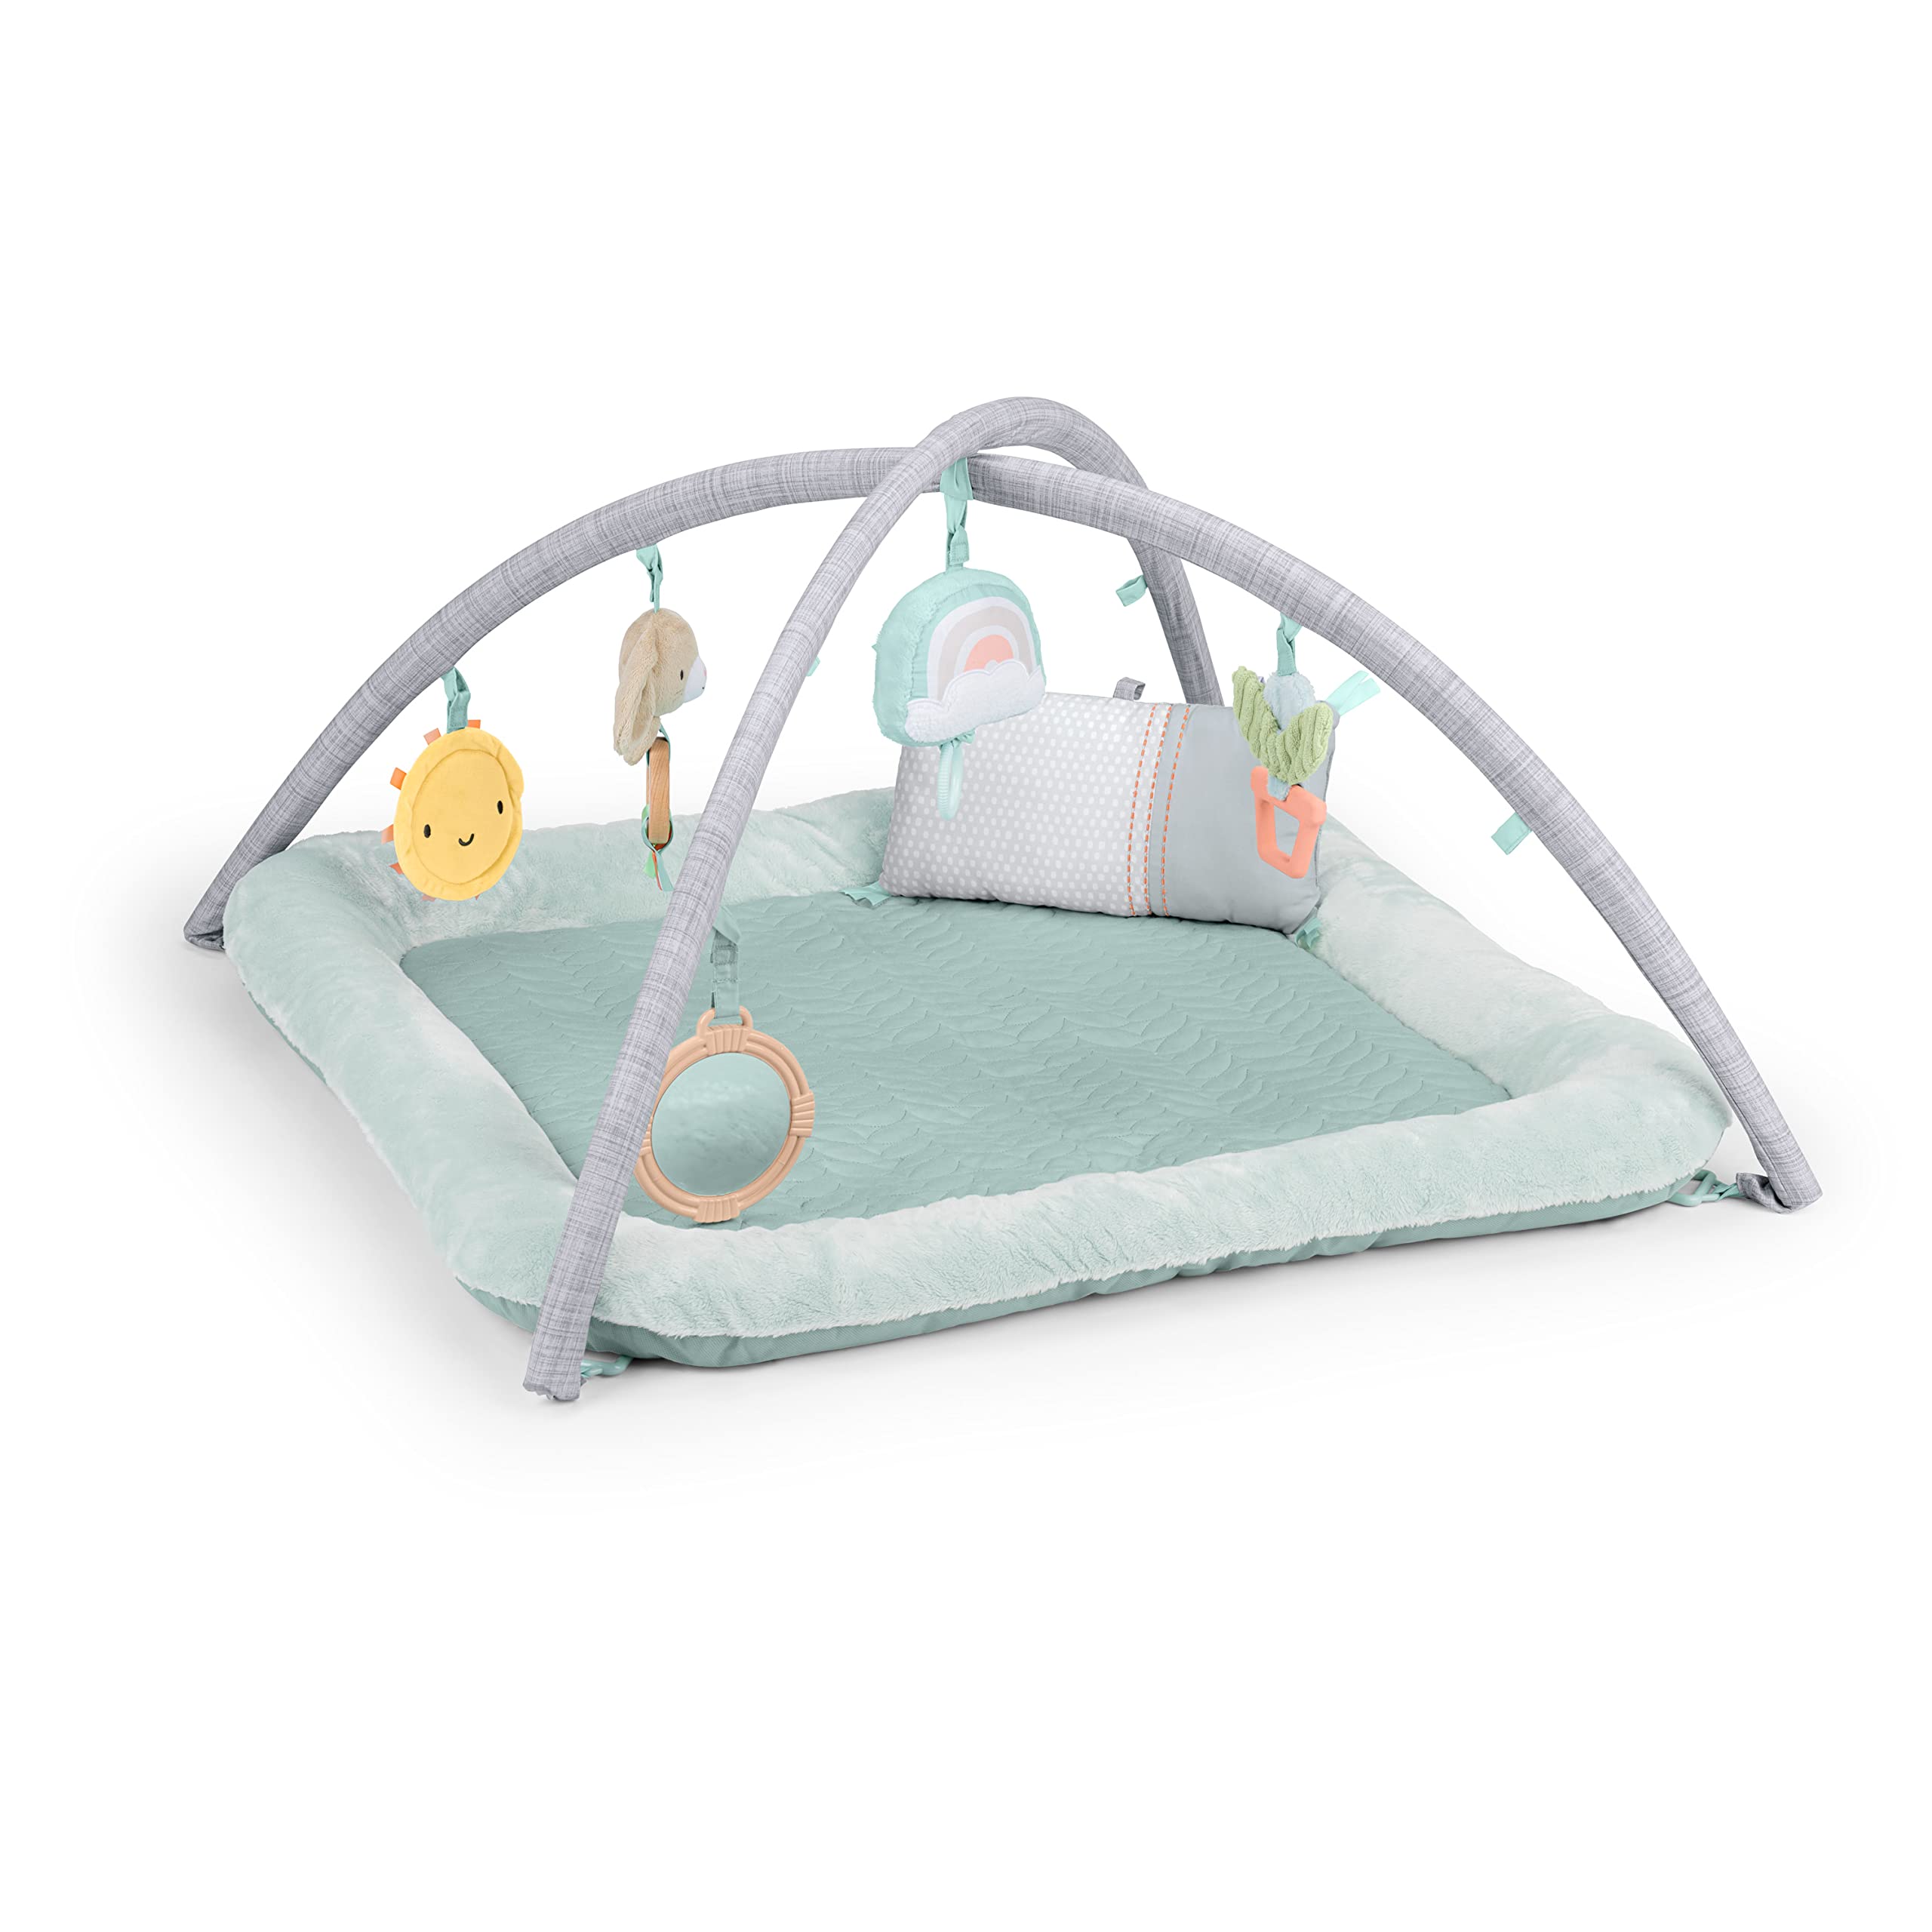 Ingenuity Calm Springs Plush Activity Gym for Baby, Ultra-Soft Premium Mat, Toys